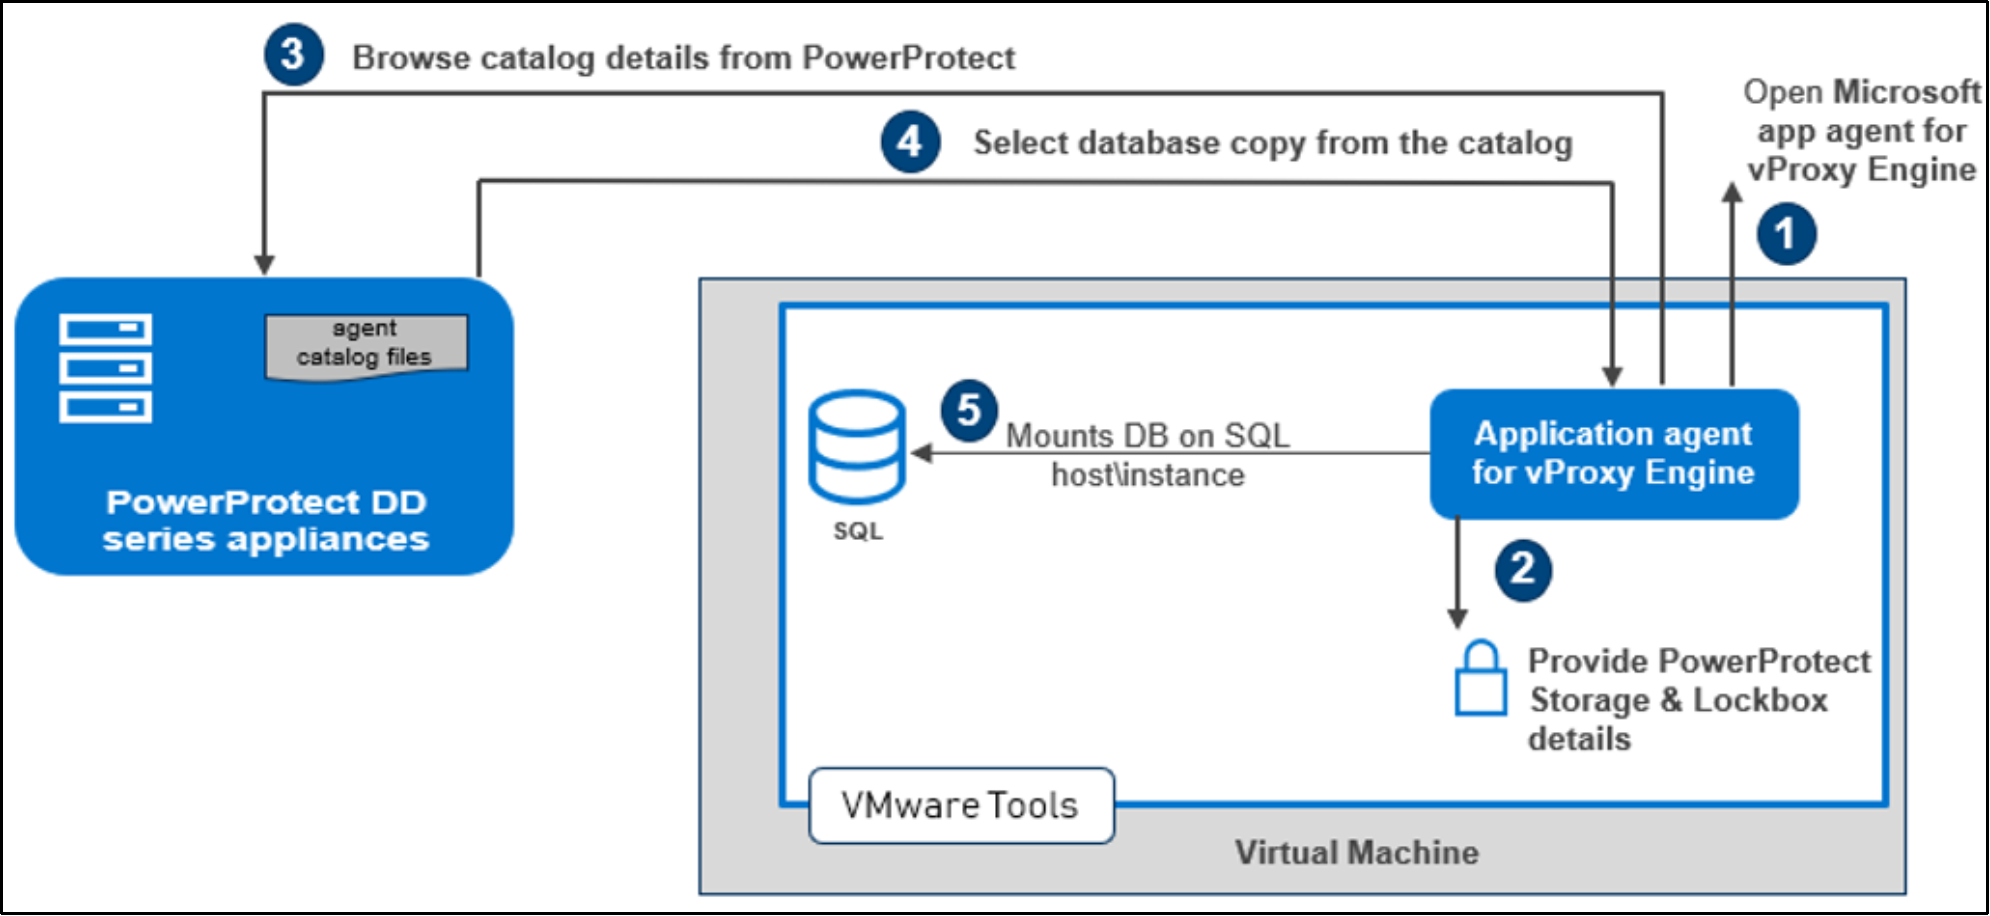 The image shows the for SQL Instant access using the vProxy engine.